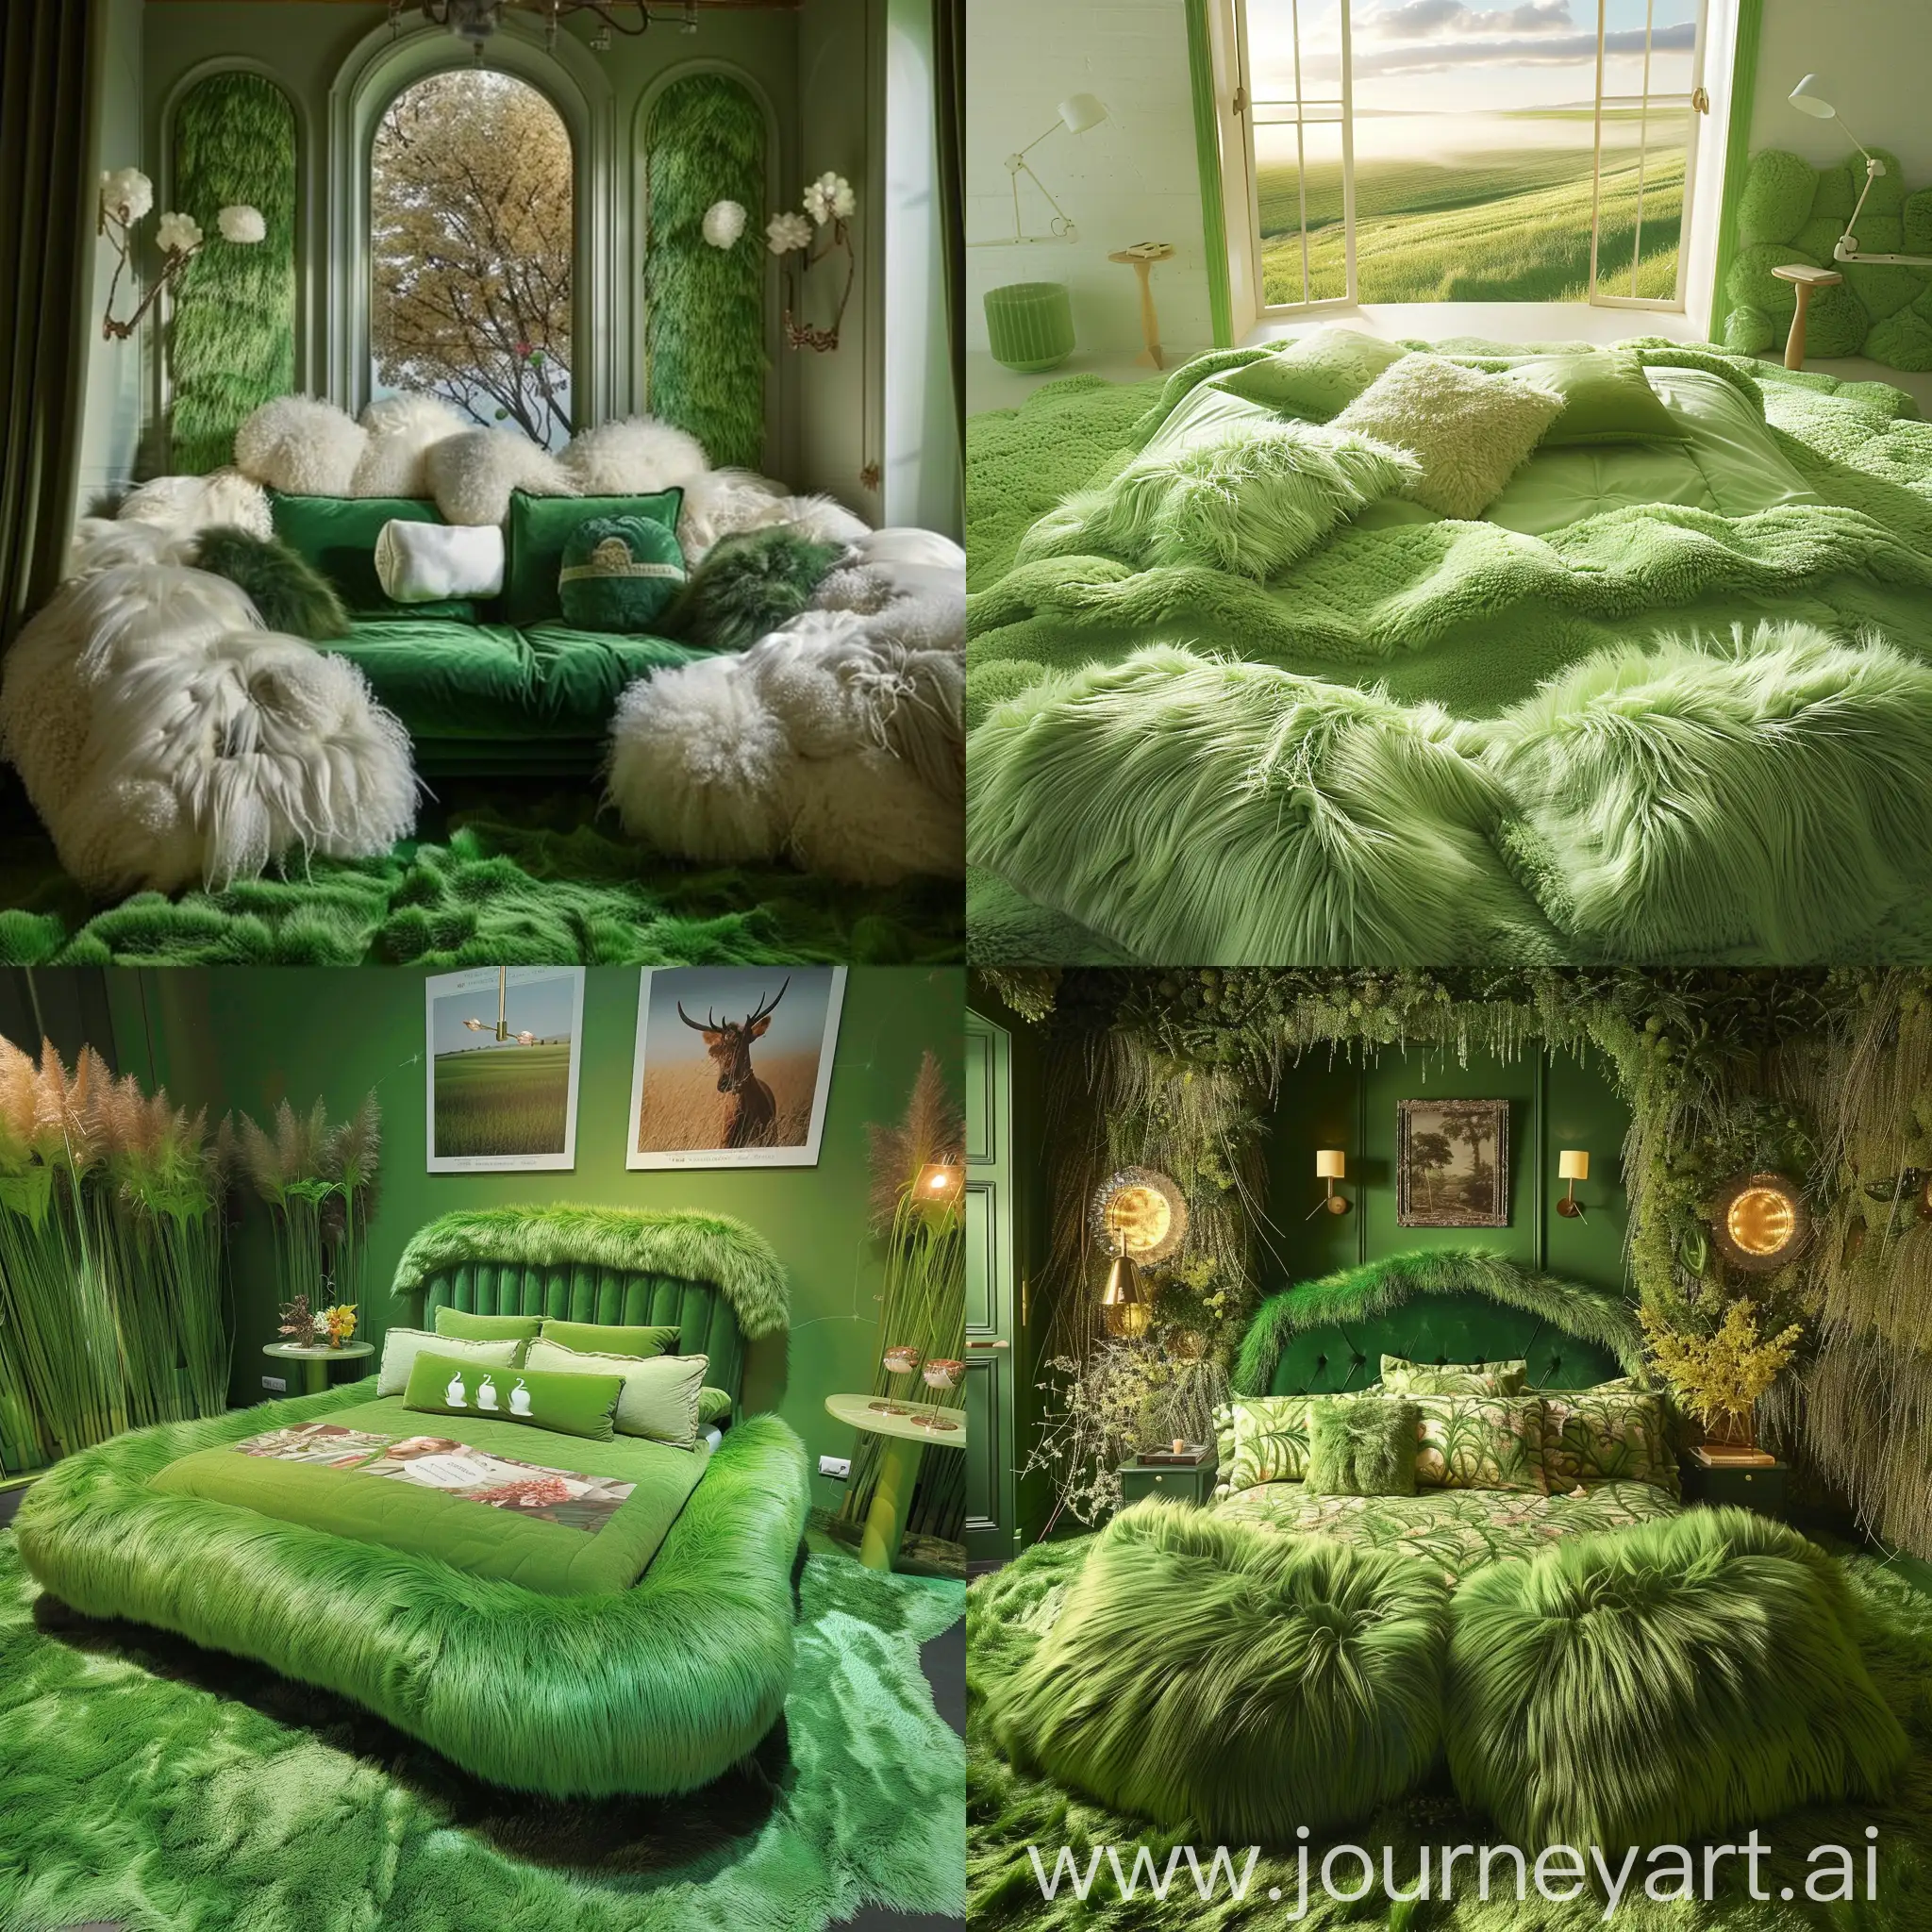 The bedroom with very fluffy throw pillows in green grass style and the wonderful green bed in the middle is iconic,